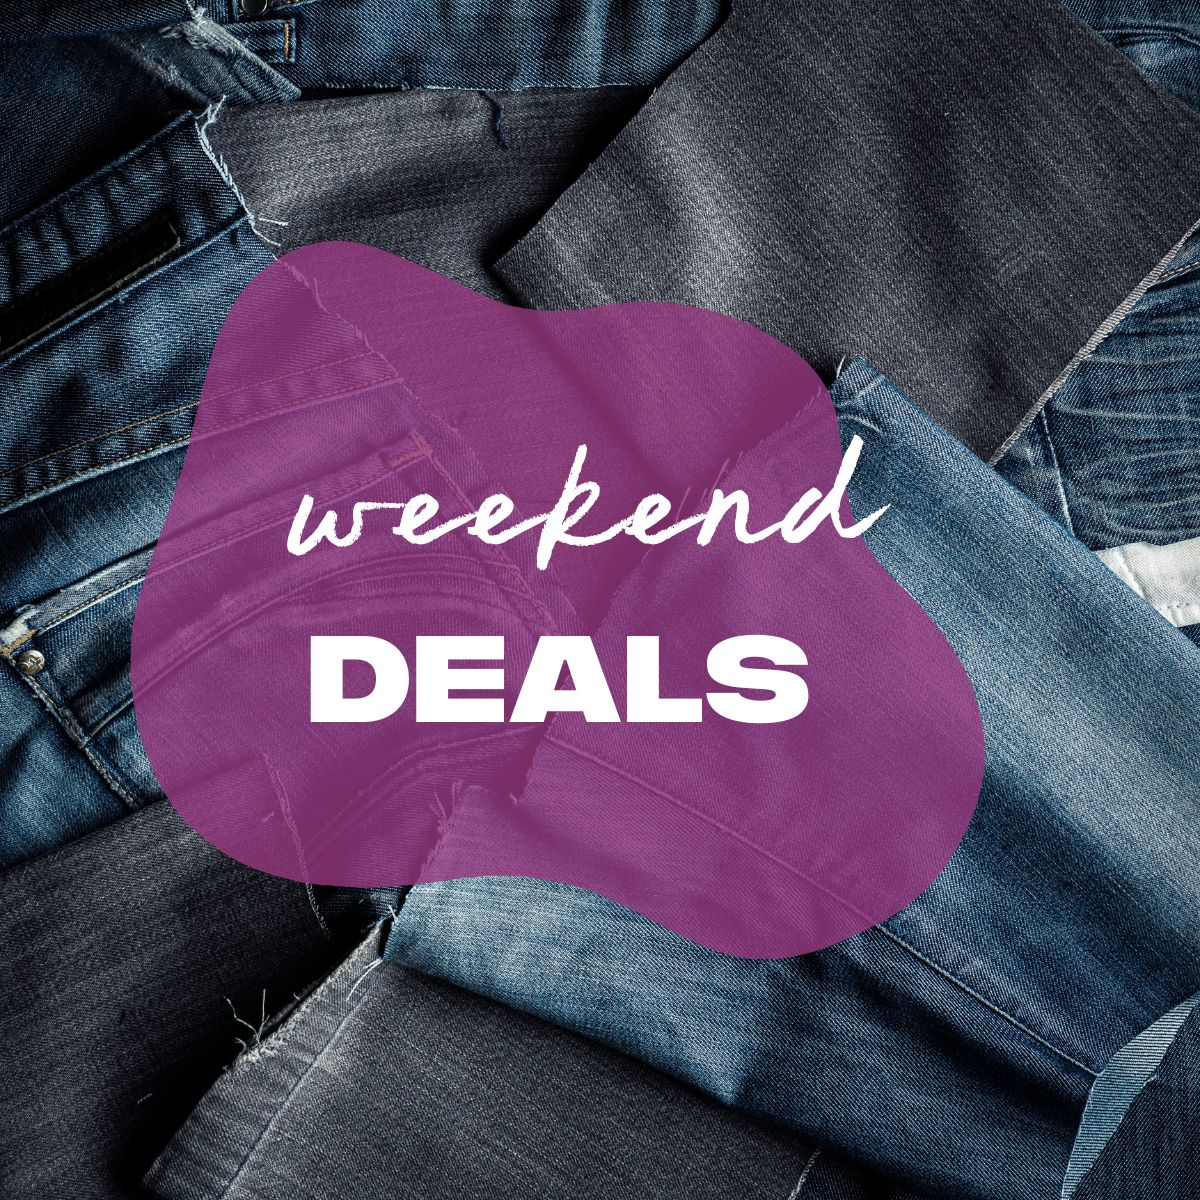 These Are the Best Sales Happening This Weekend